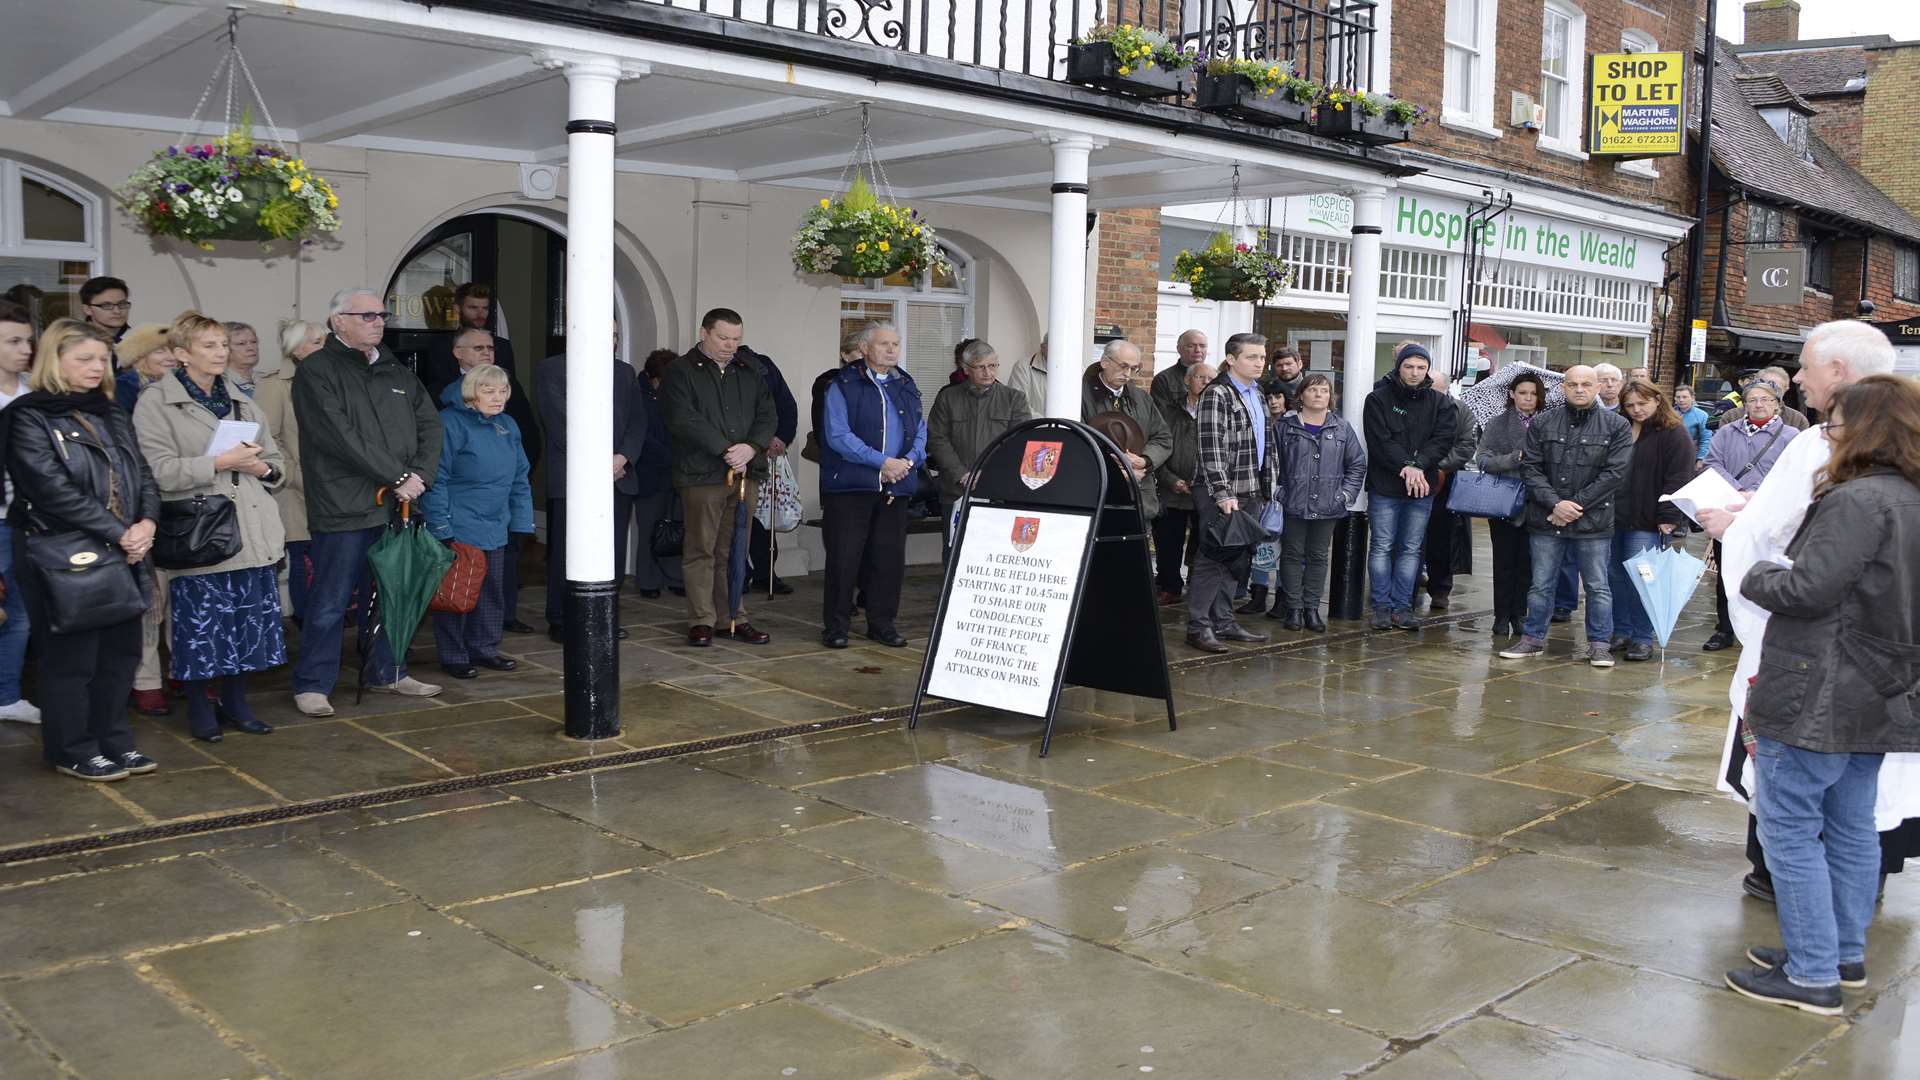 A service and minute's silence in memory of the Paris attacks was held outside Tenterden town hall.